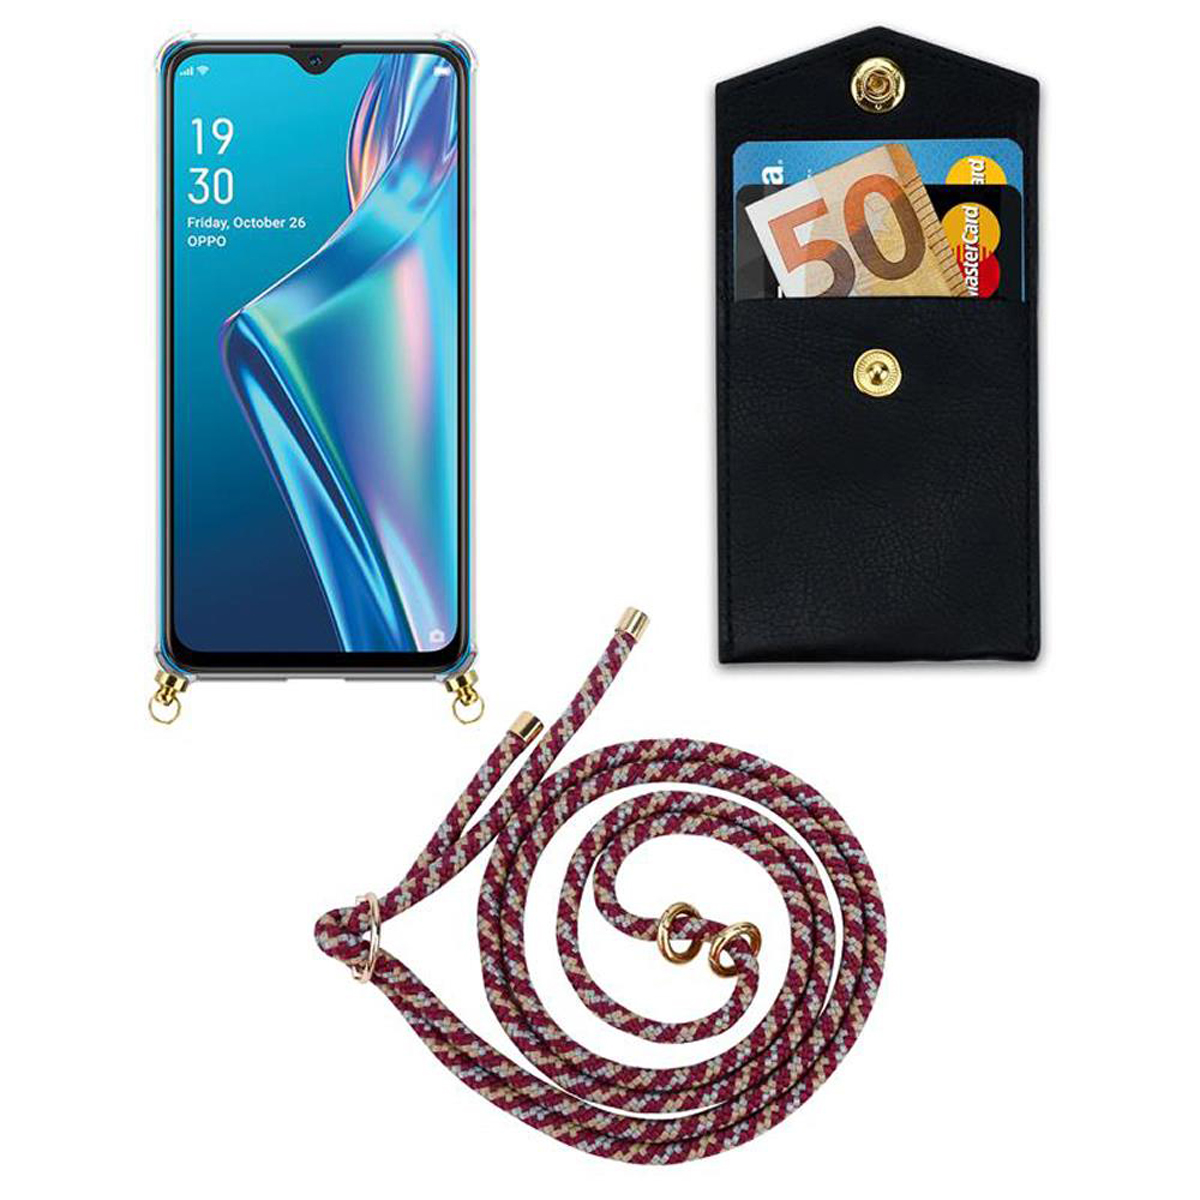 ROT mit Backcover, Kordel Gold WEIß GELB A12, Ringen, abnehmbarer Oppo, und Hülle, CADORABO Handy Band Kette